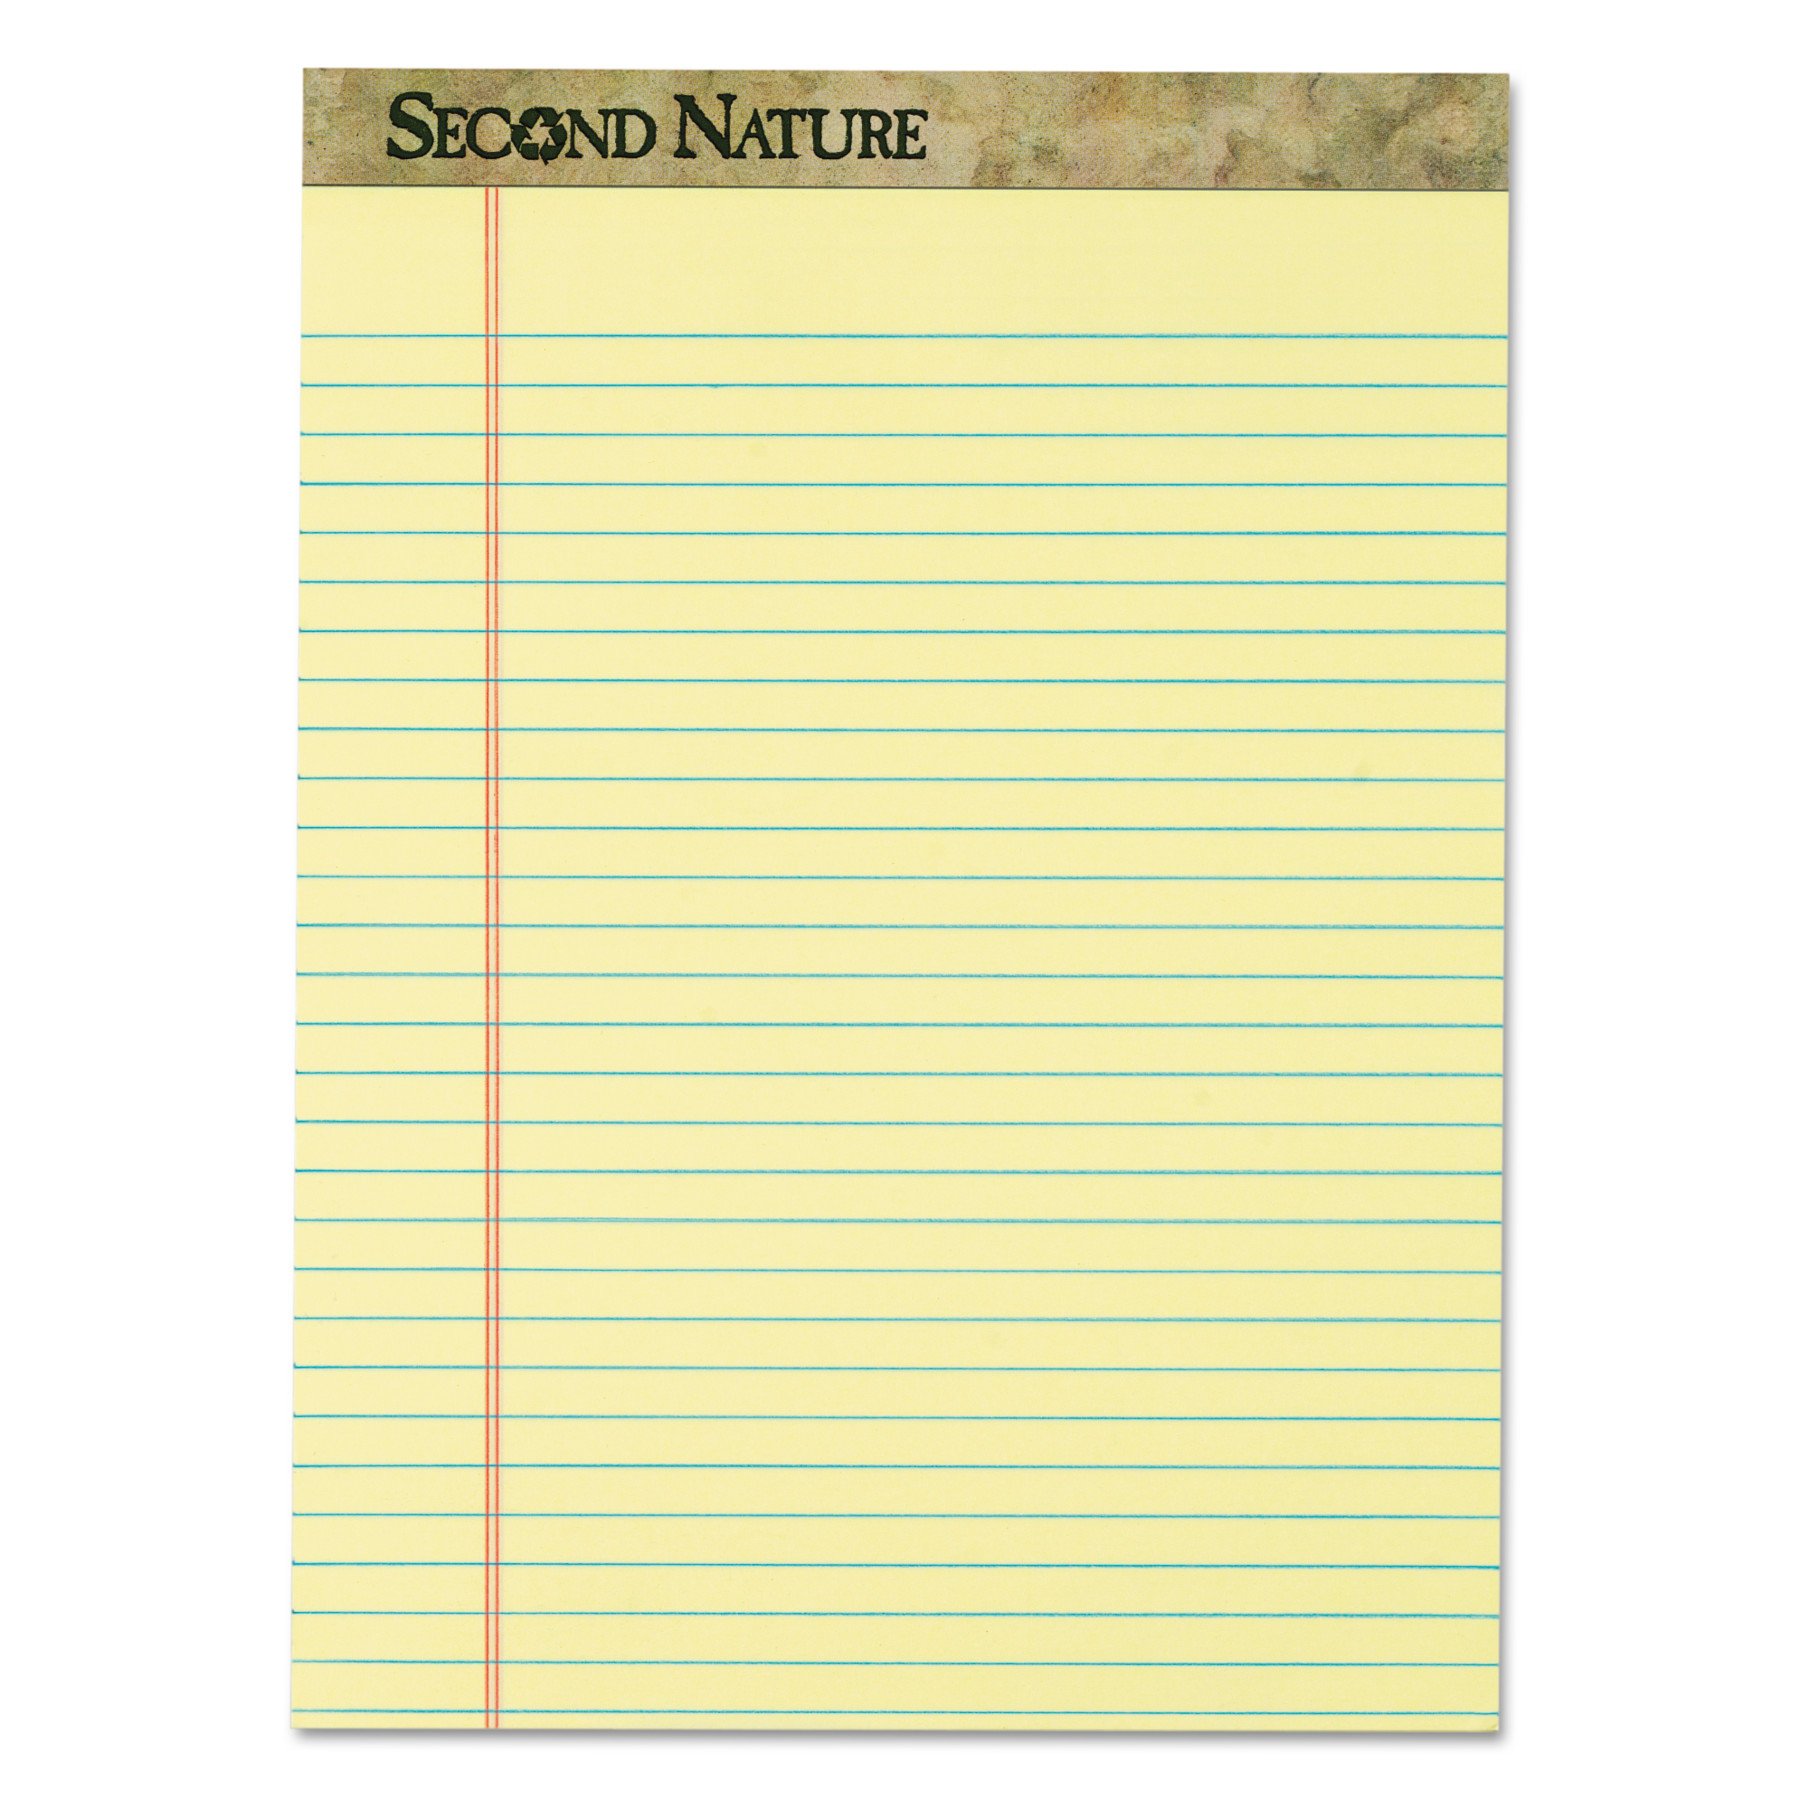 Book Cover TOPS 74890 Second Nature Recycled Pads, 8 1/2 x 11 3/4, Canary, 50 Sheets (Pack of 12)